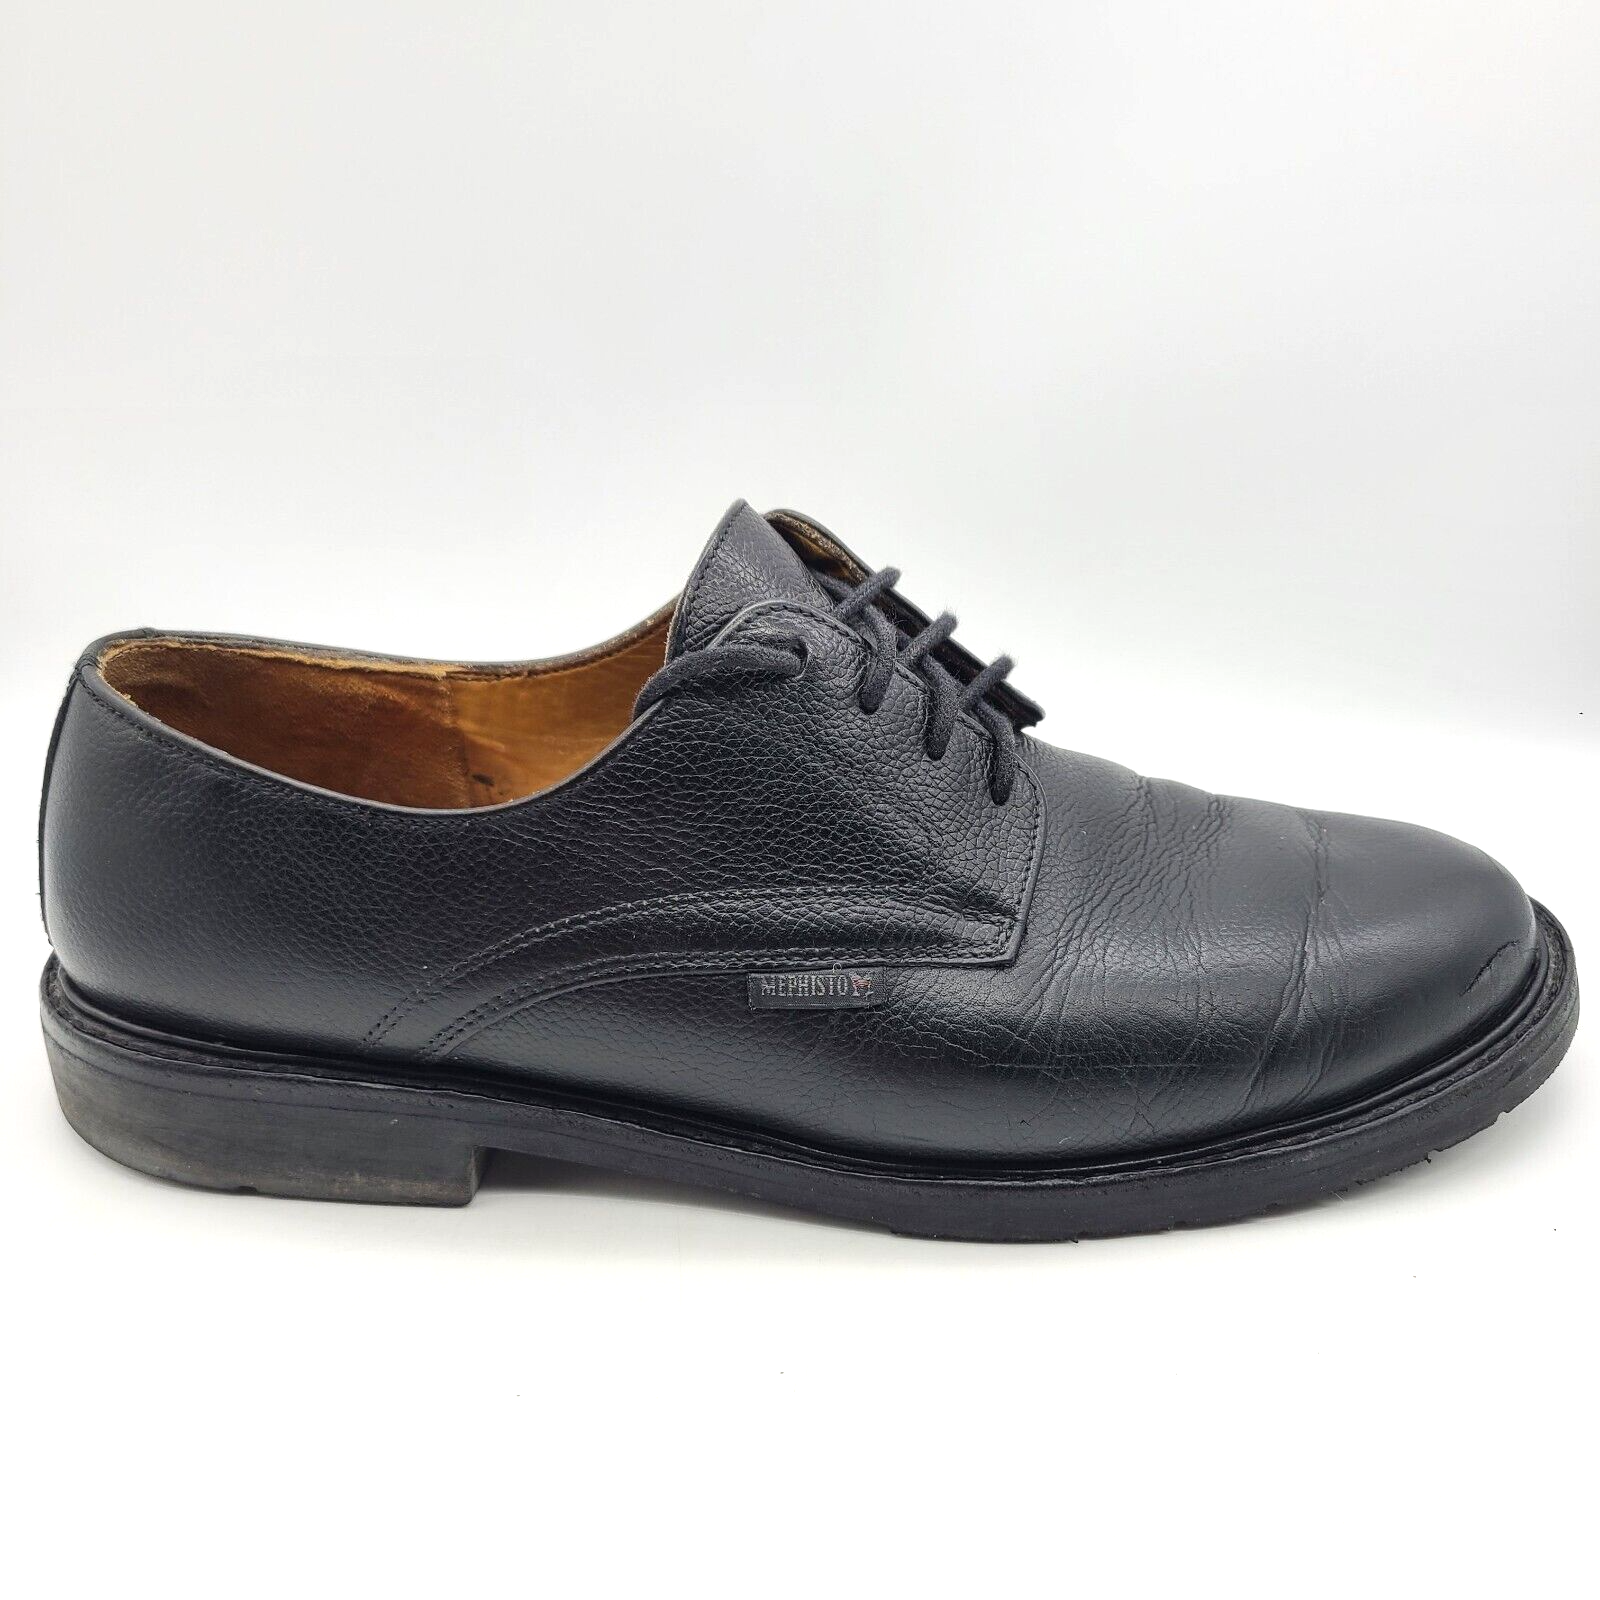 Primary image for MEPHISTO Air Relax Shoes Men's 11 Goodyear Welted Black Pebble Grain Leather